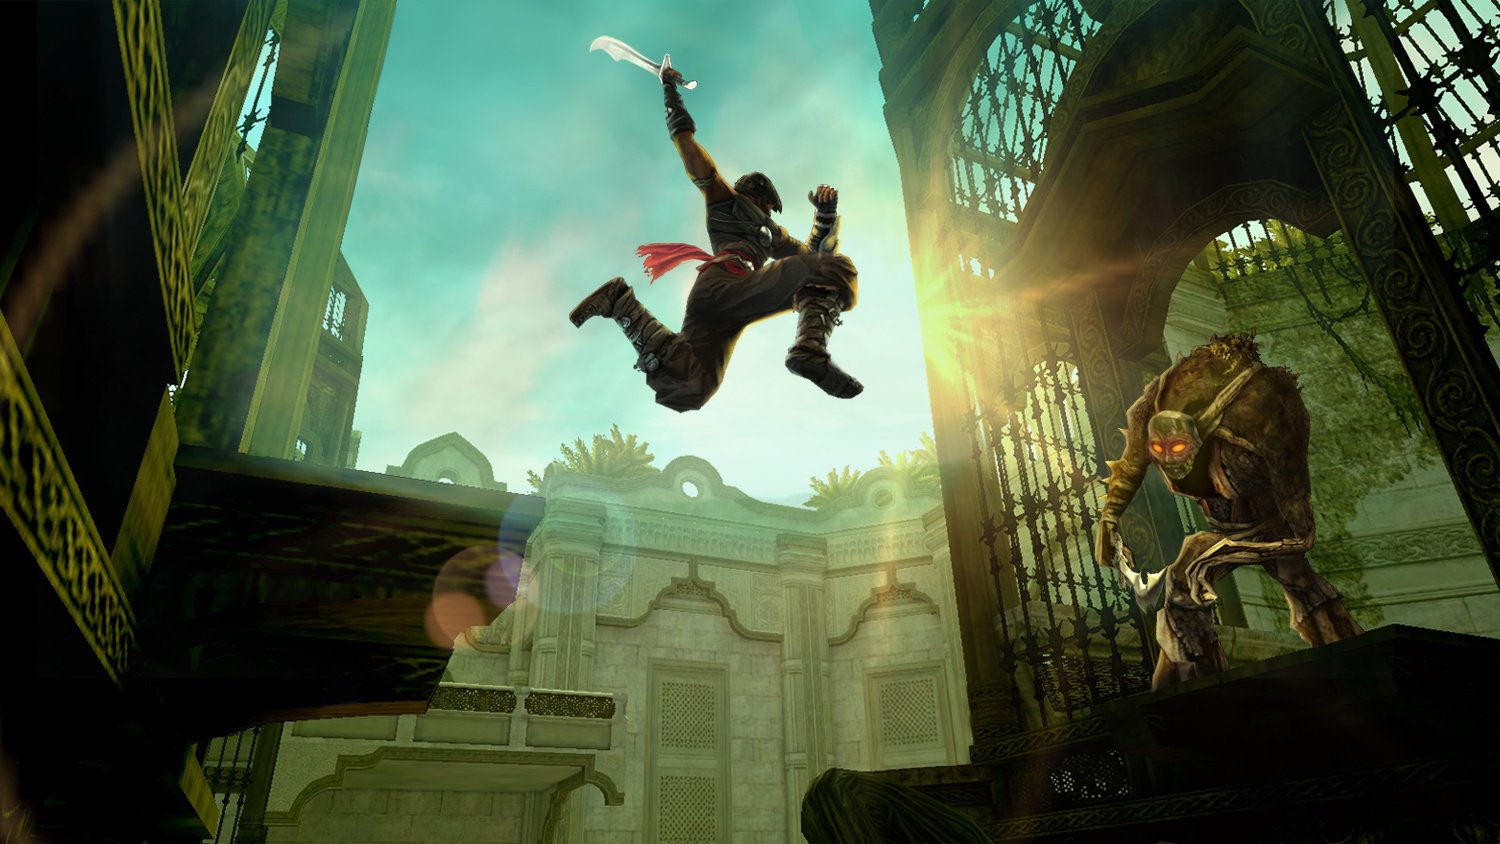 Review: Consequence-Free Prince of Persia Reduces Frustration, Loses the  Fun